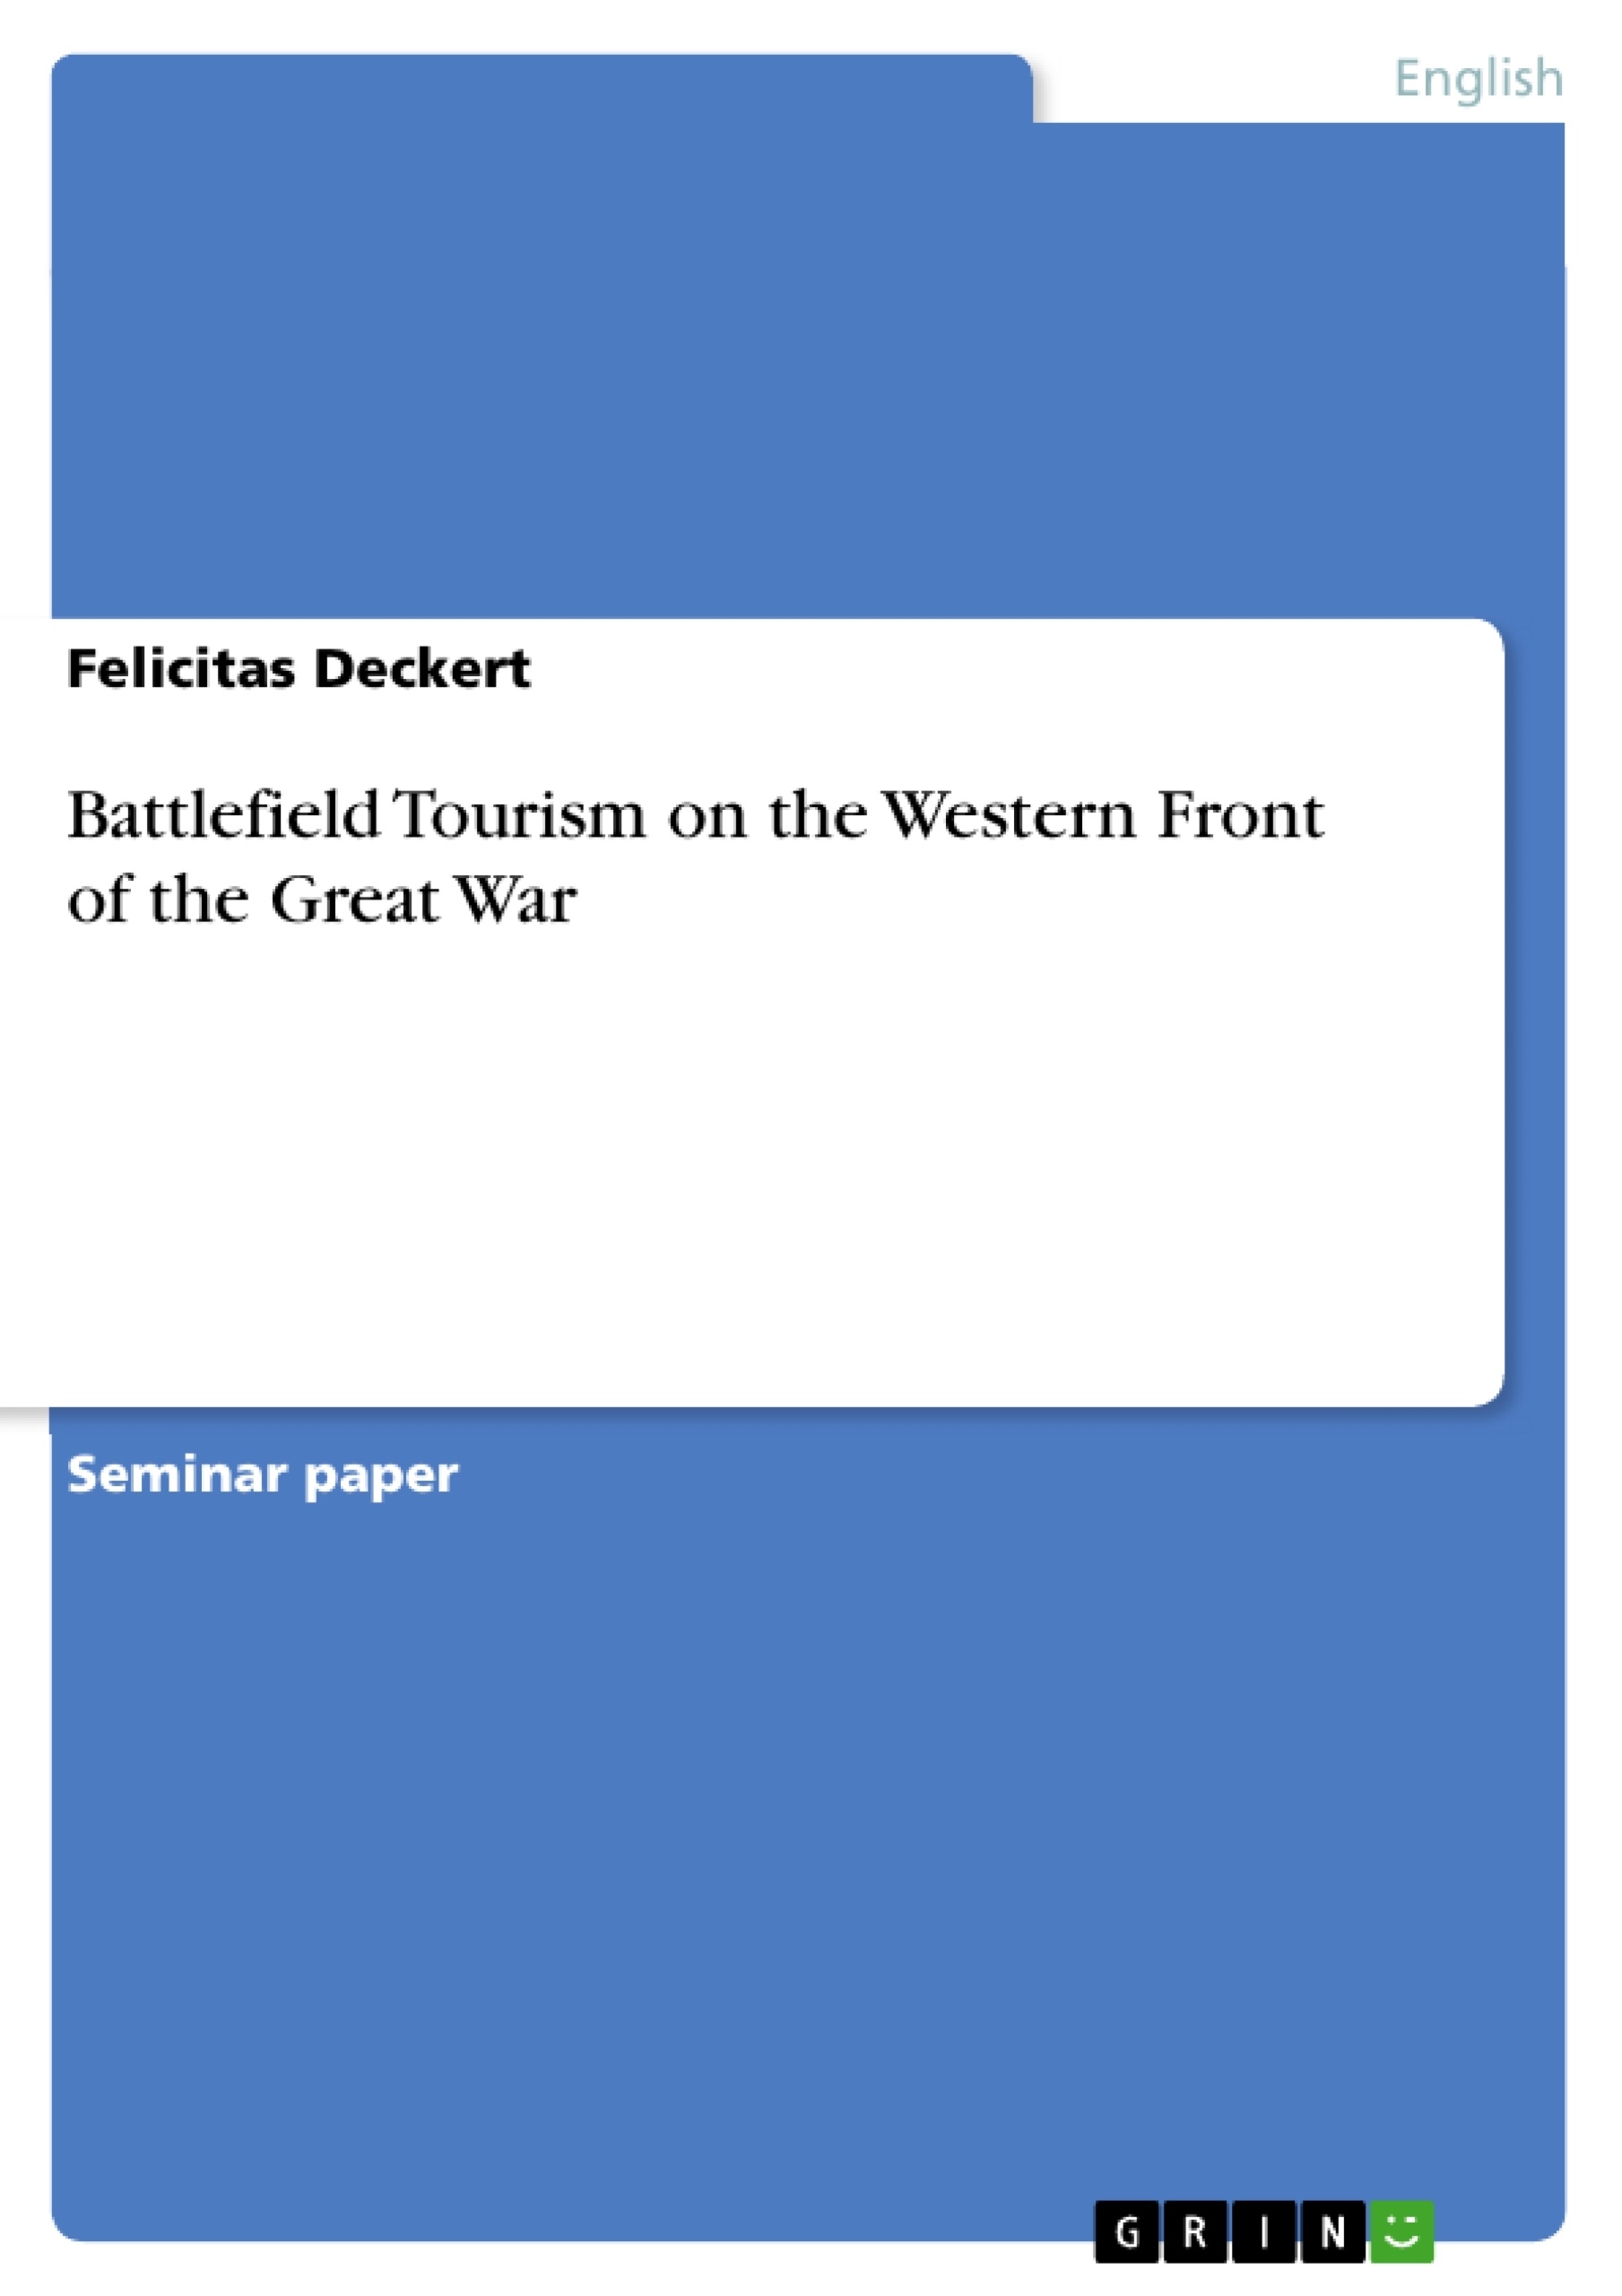 Title: Battlefield Tourism on the Western Front of the Great War